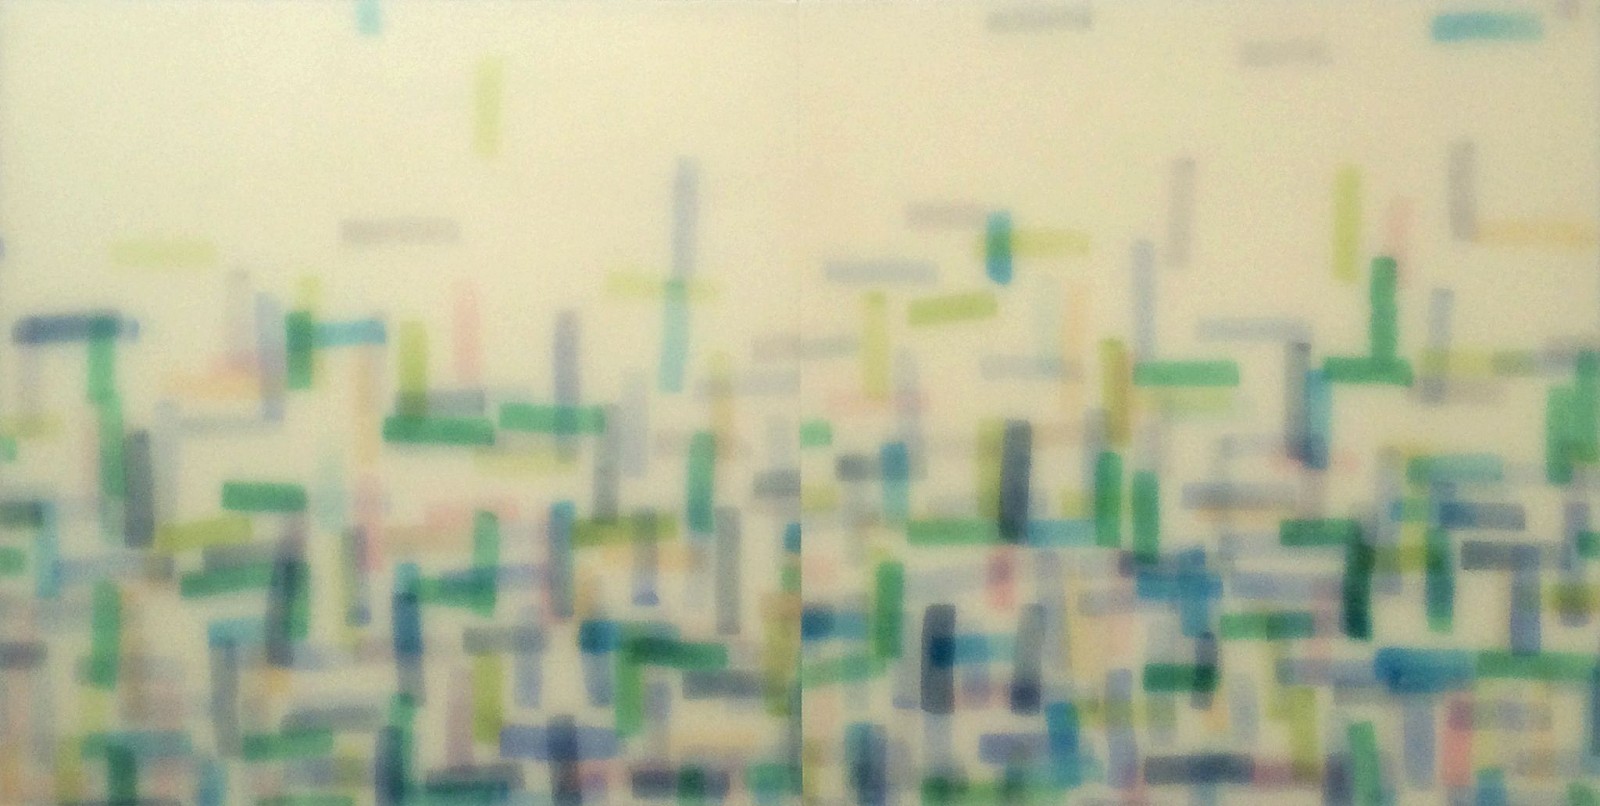 Mike Solomon, Elysium (Diptych) | SOLD, 2015
Watercolor on papers infused with resin, 24 x 48 in. (61 x 121.9 cm)
© Mike Solomon
SOLD
MSOL-00007